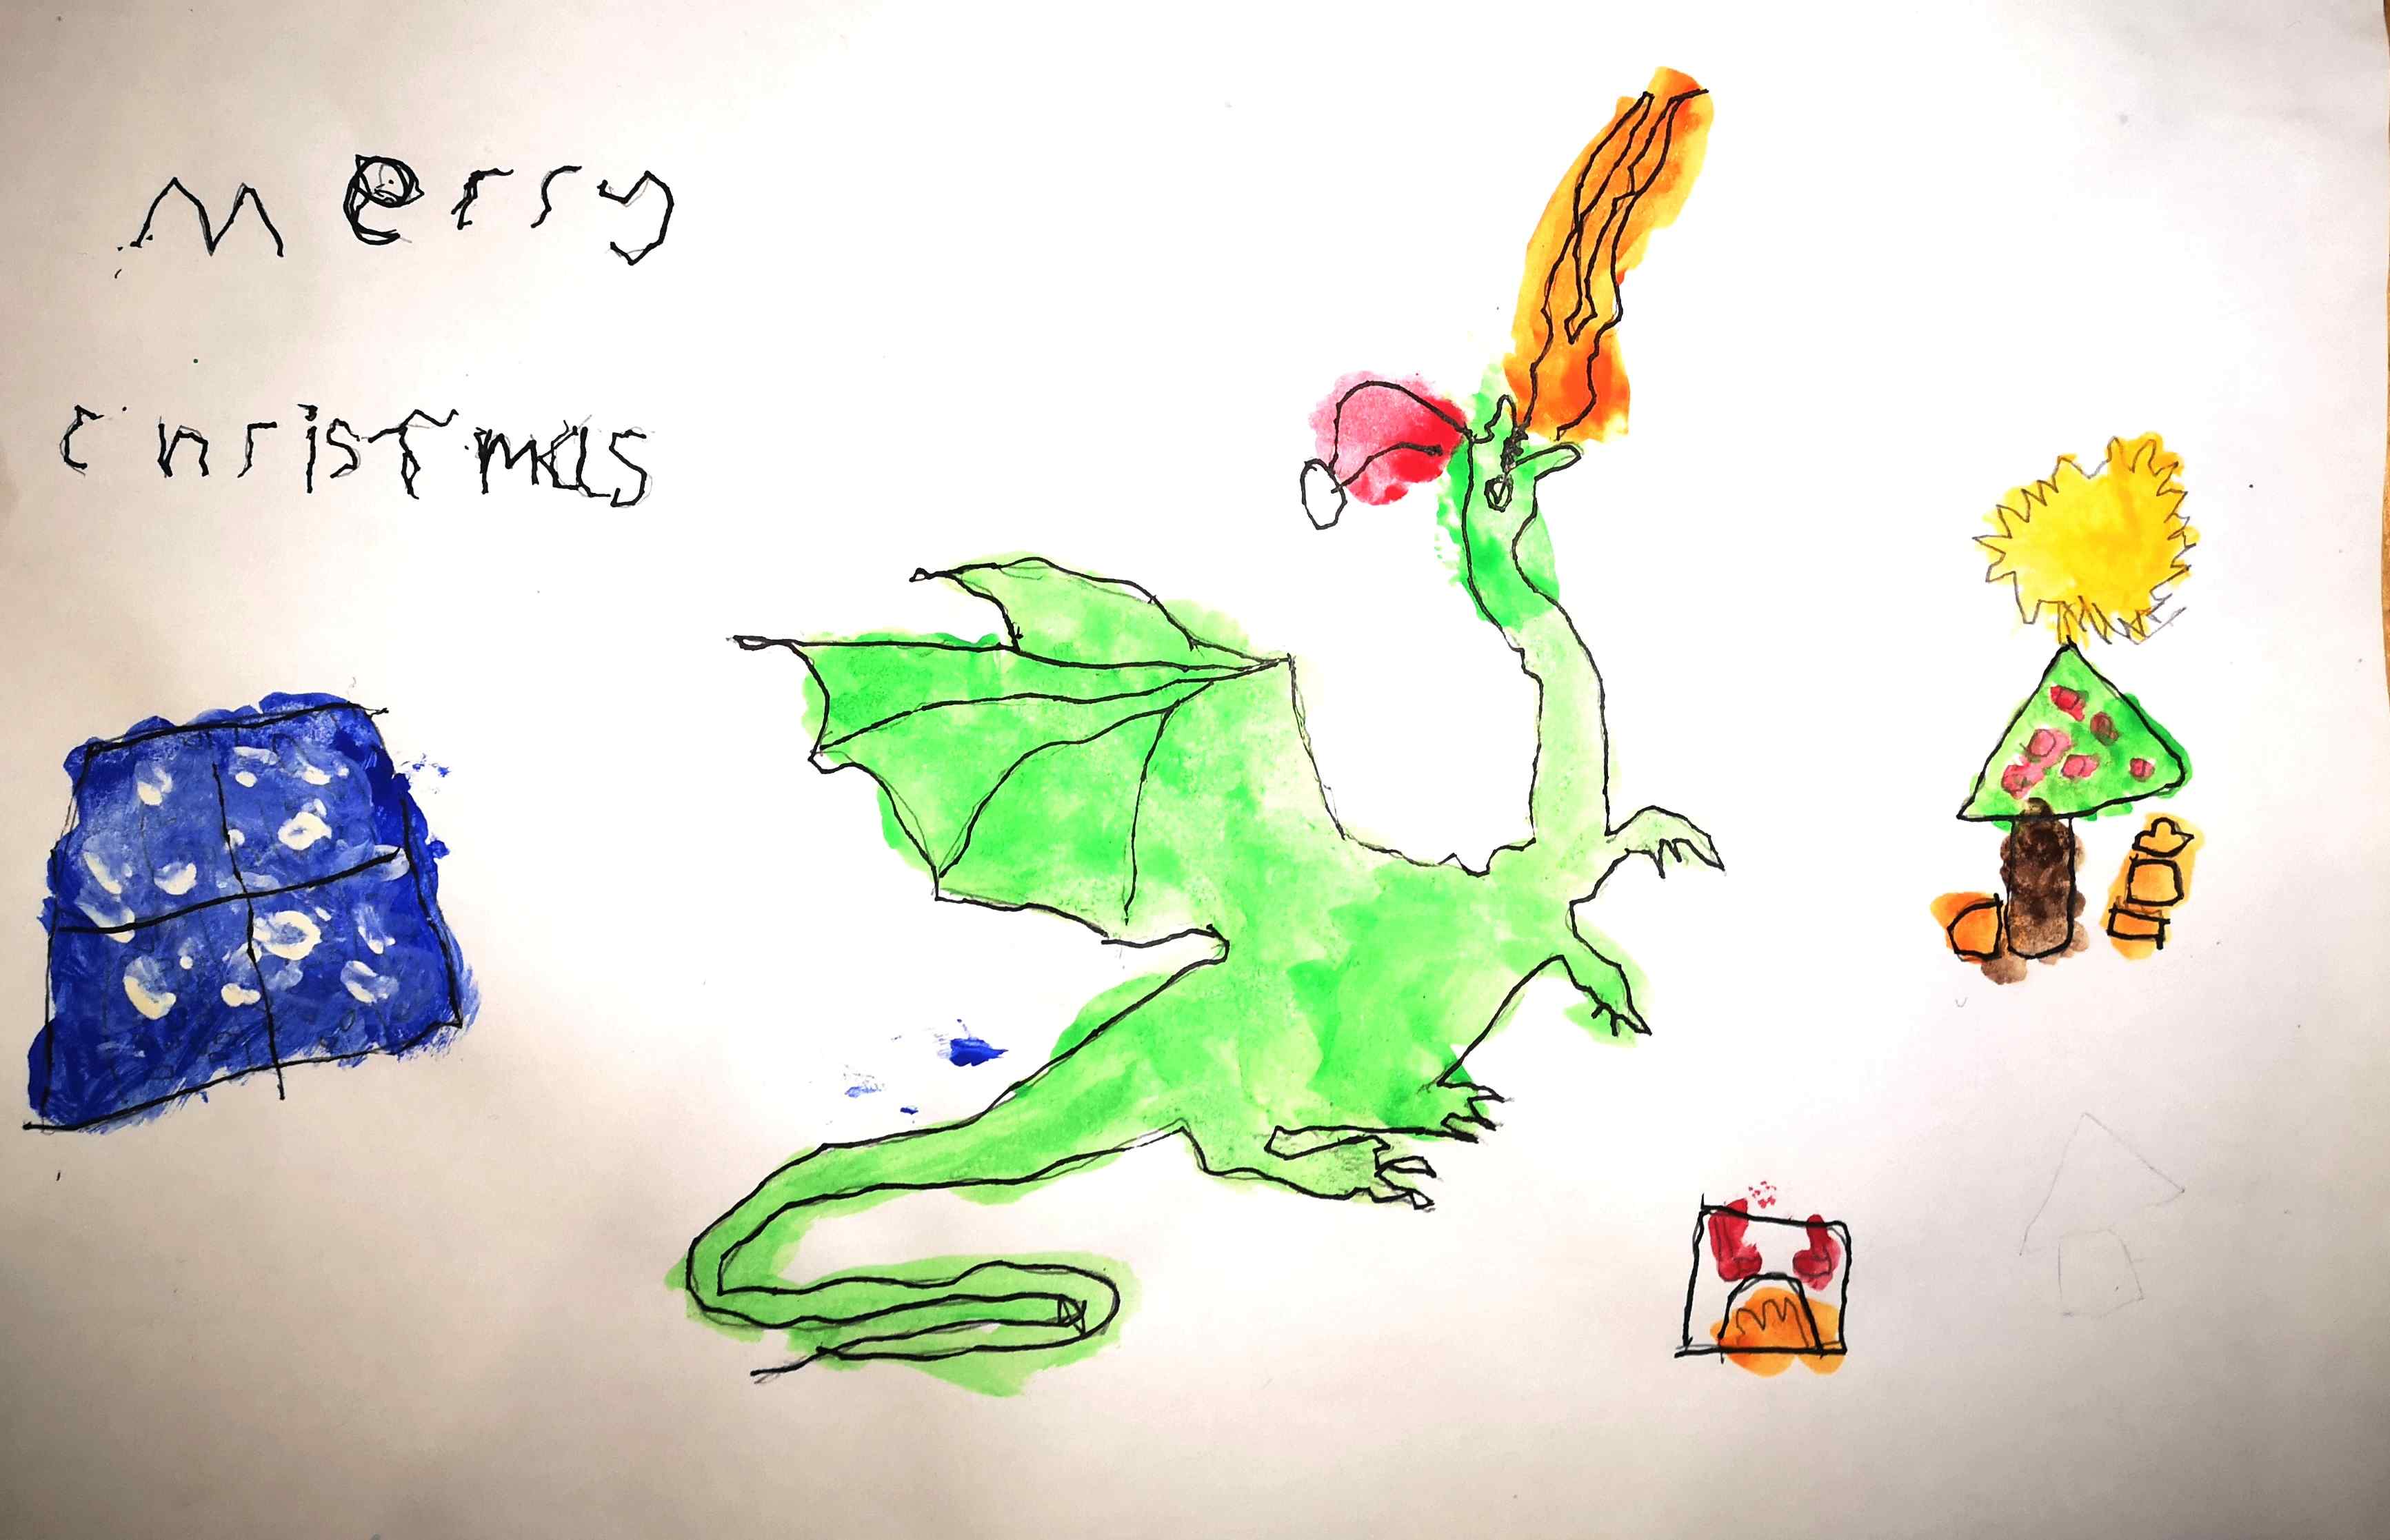 picture of a dragon drawn by competition entrant